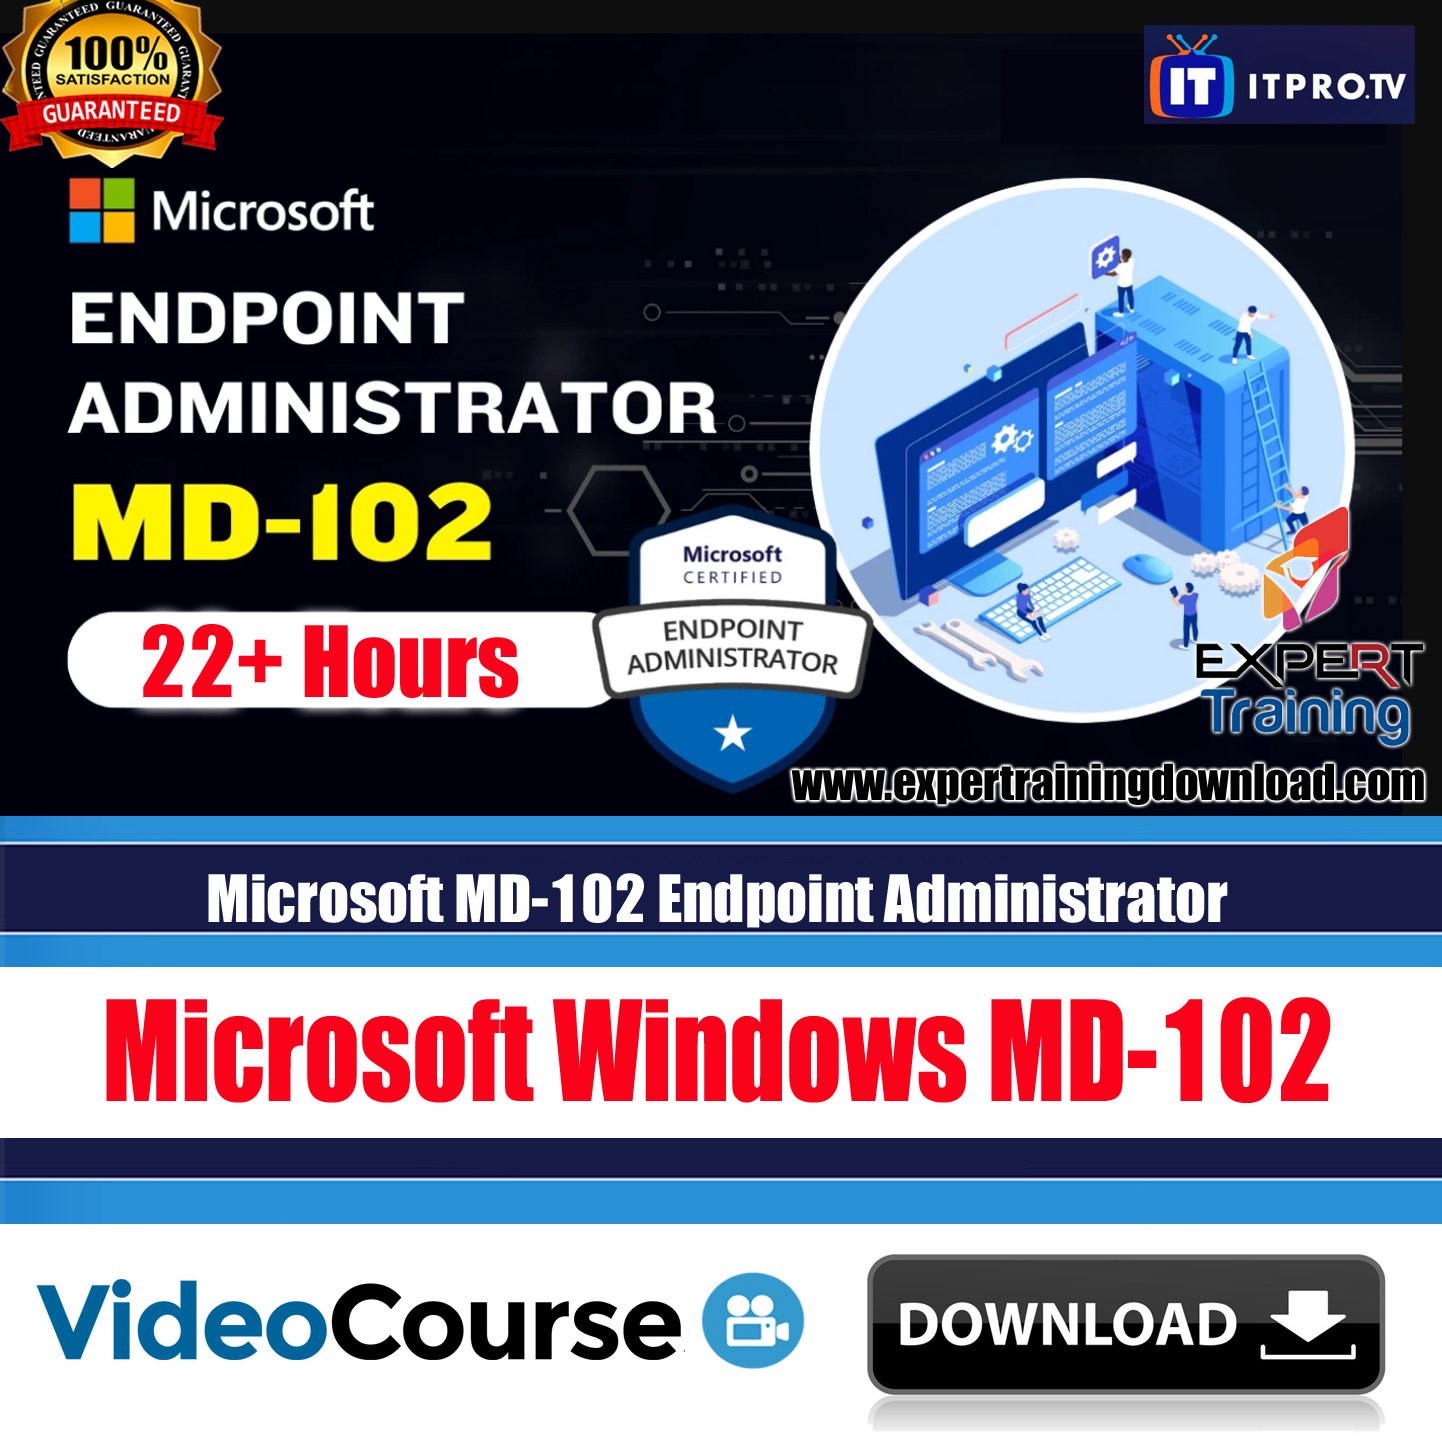 Microsoft MD-102 Endpoint Administrator